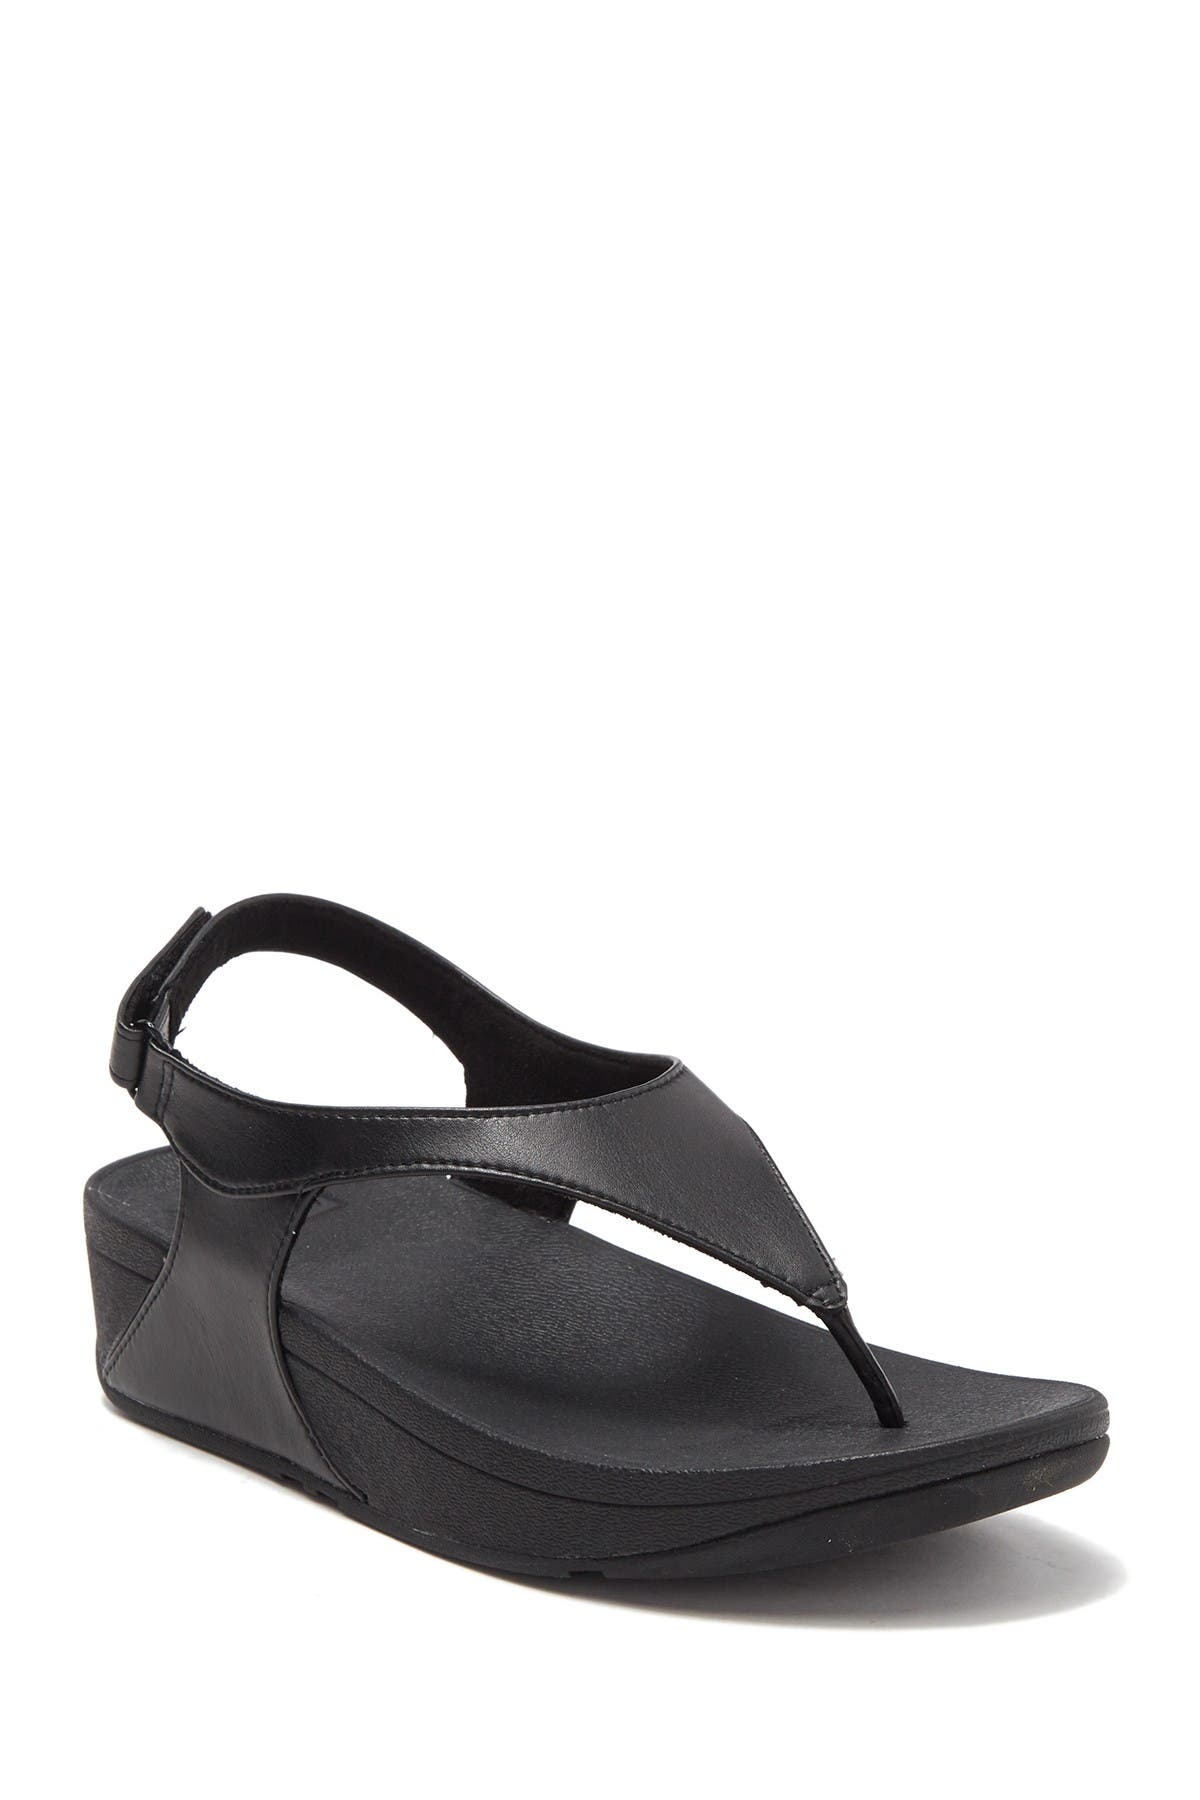 fitflop shoes nordstrom rack